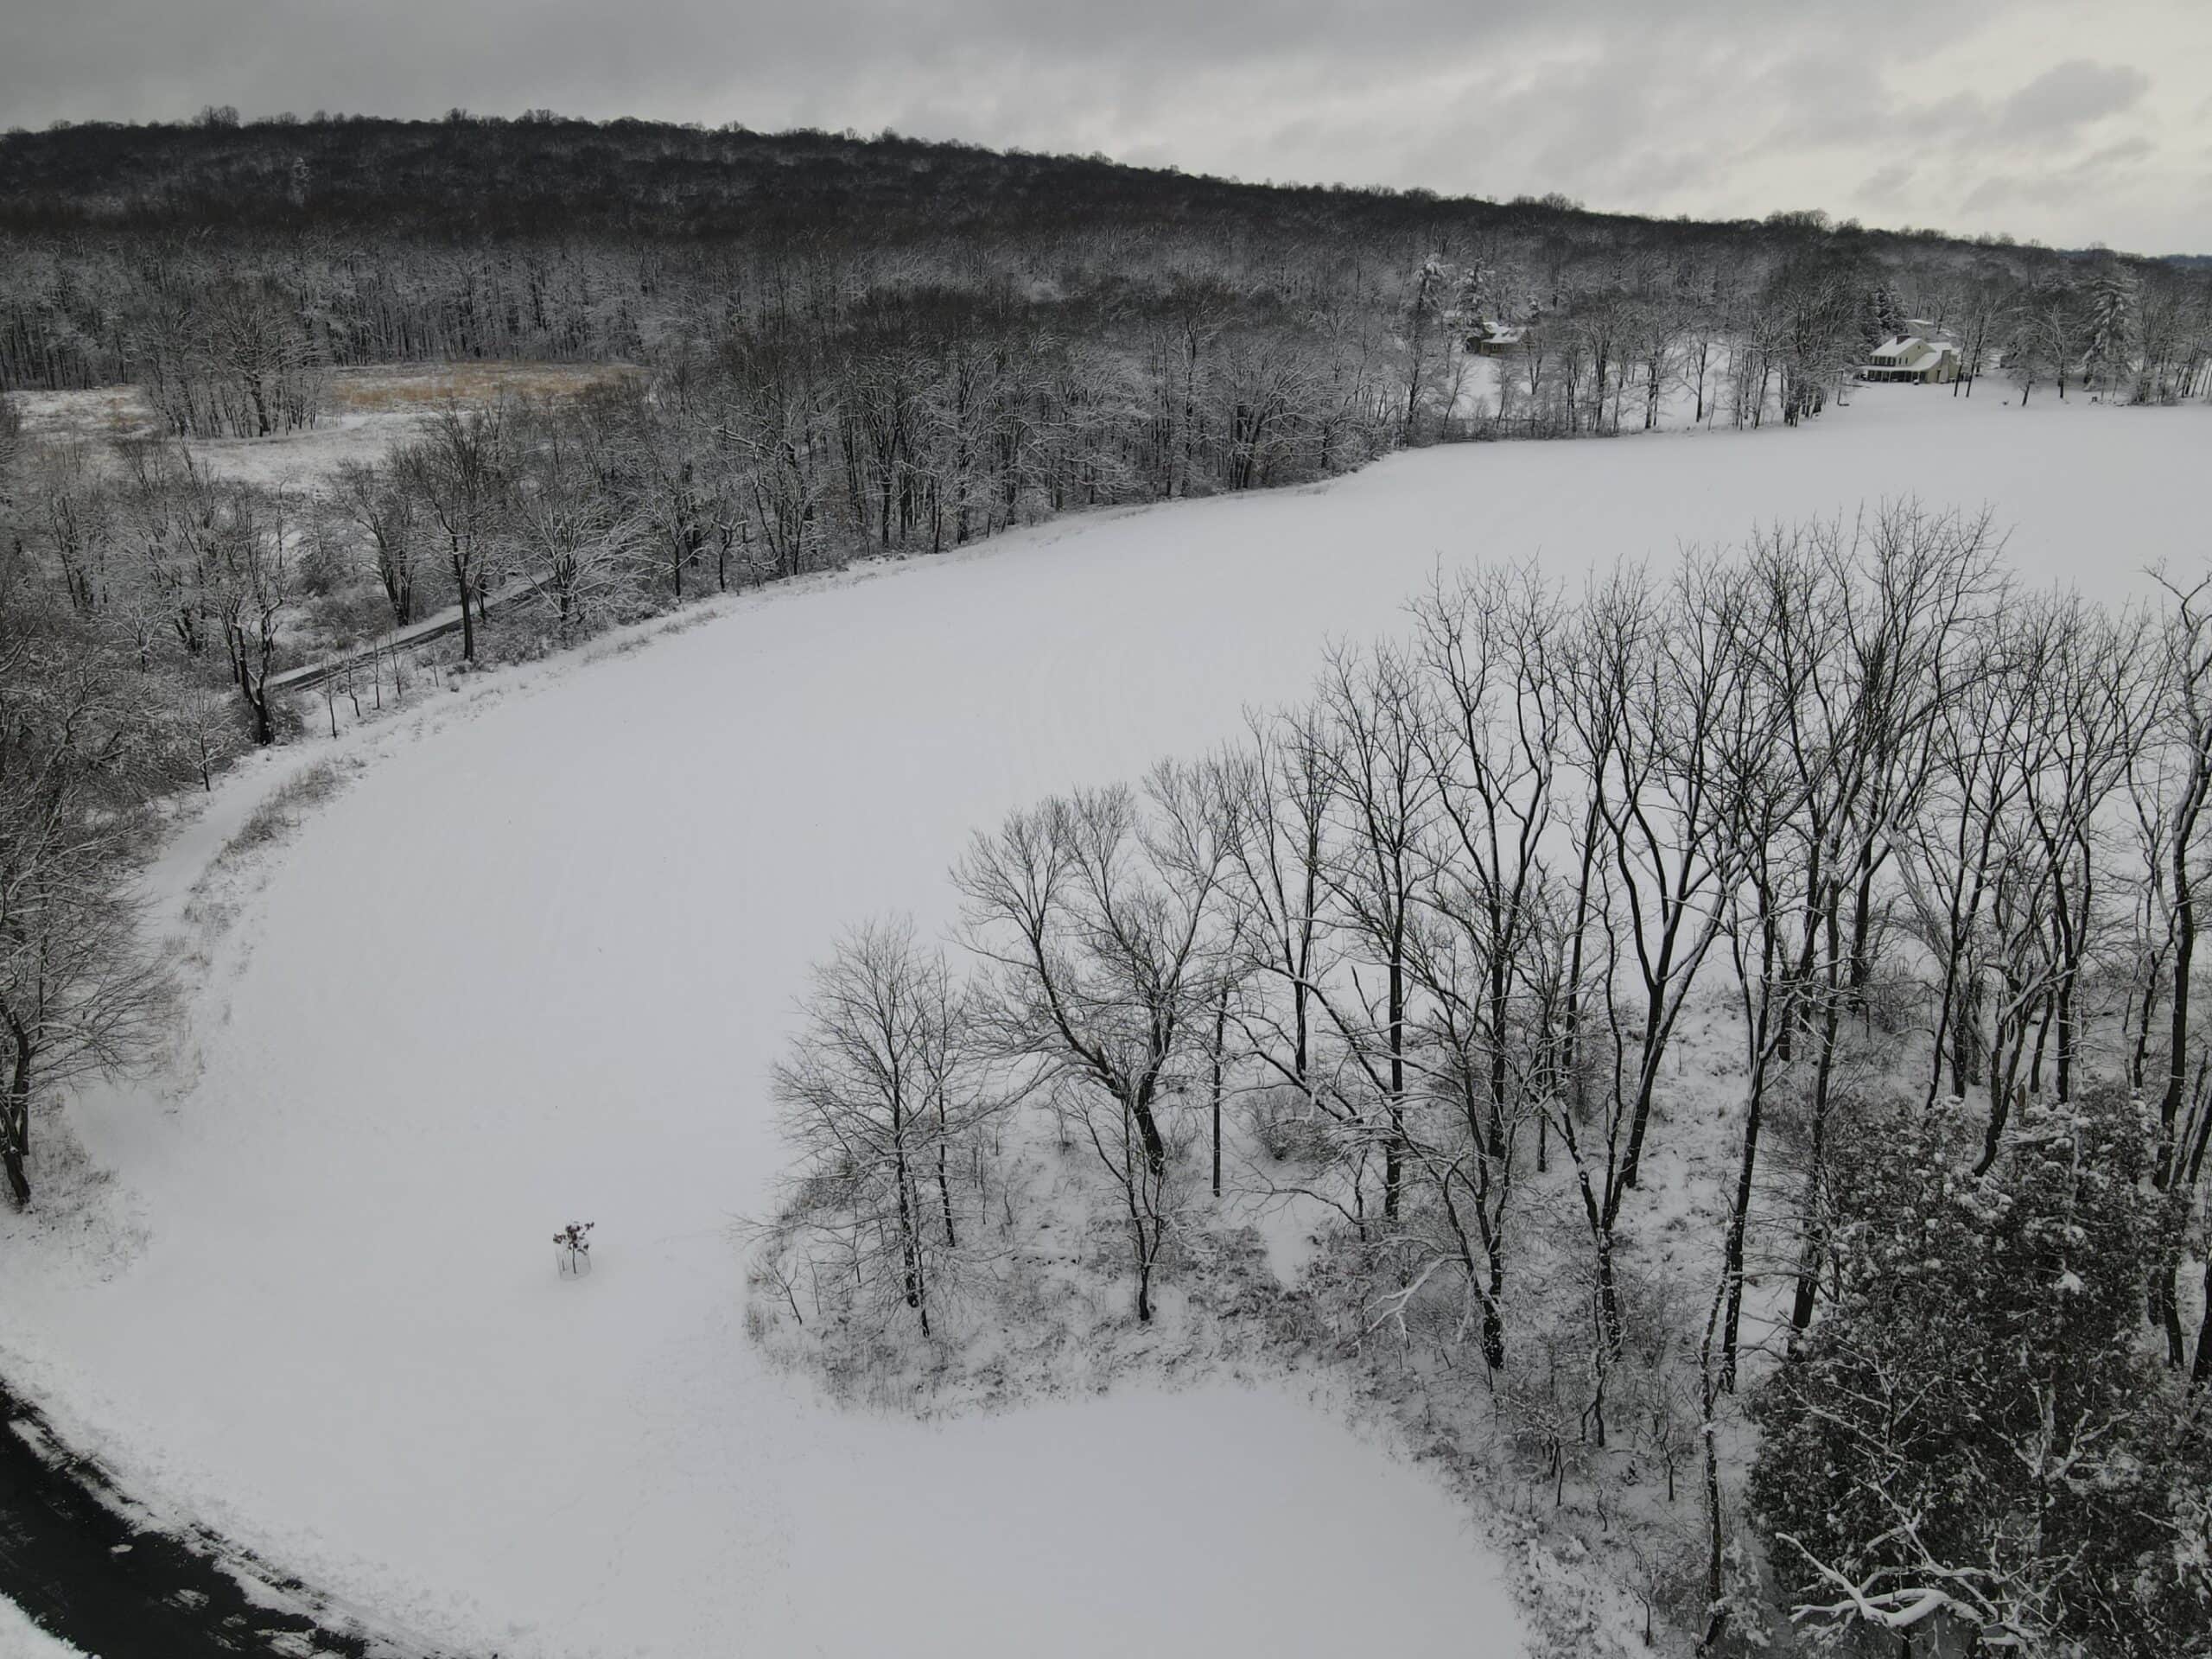 Aerial view of a curving field under snow with forested ridge in the distance